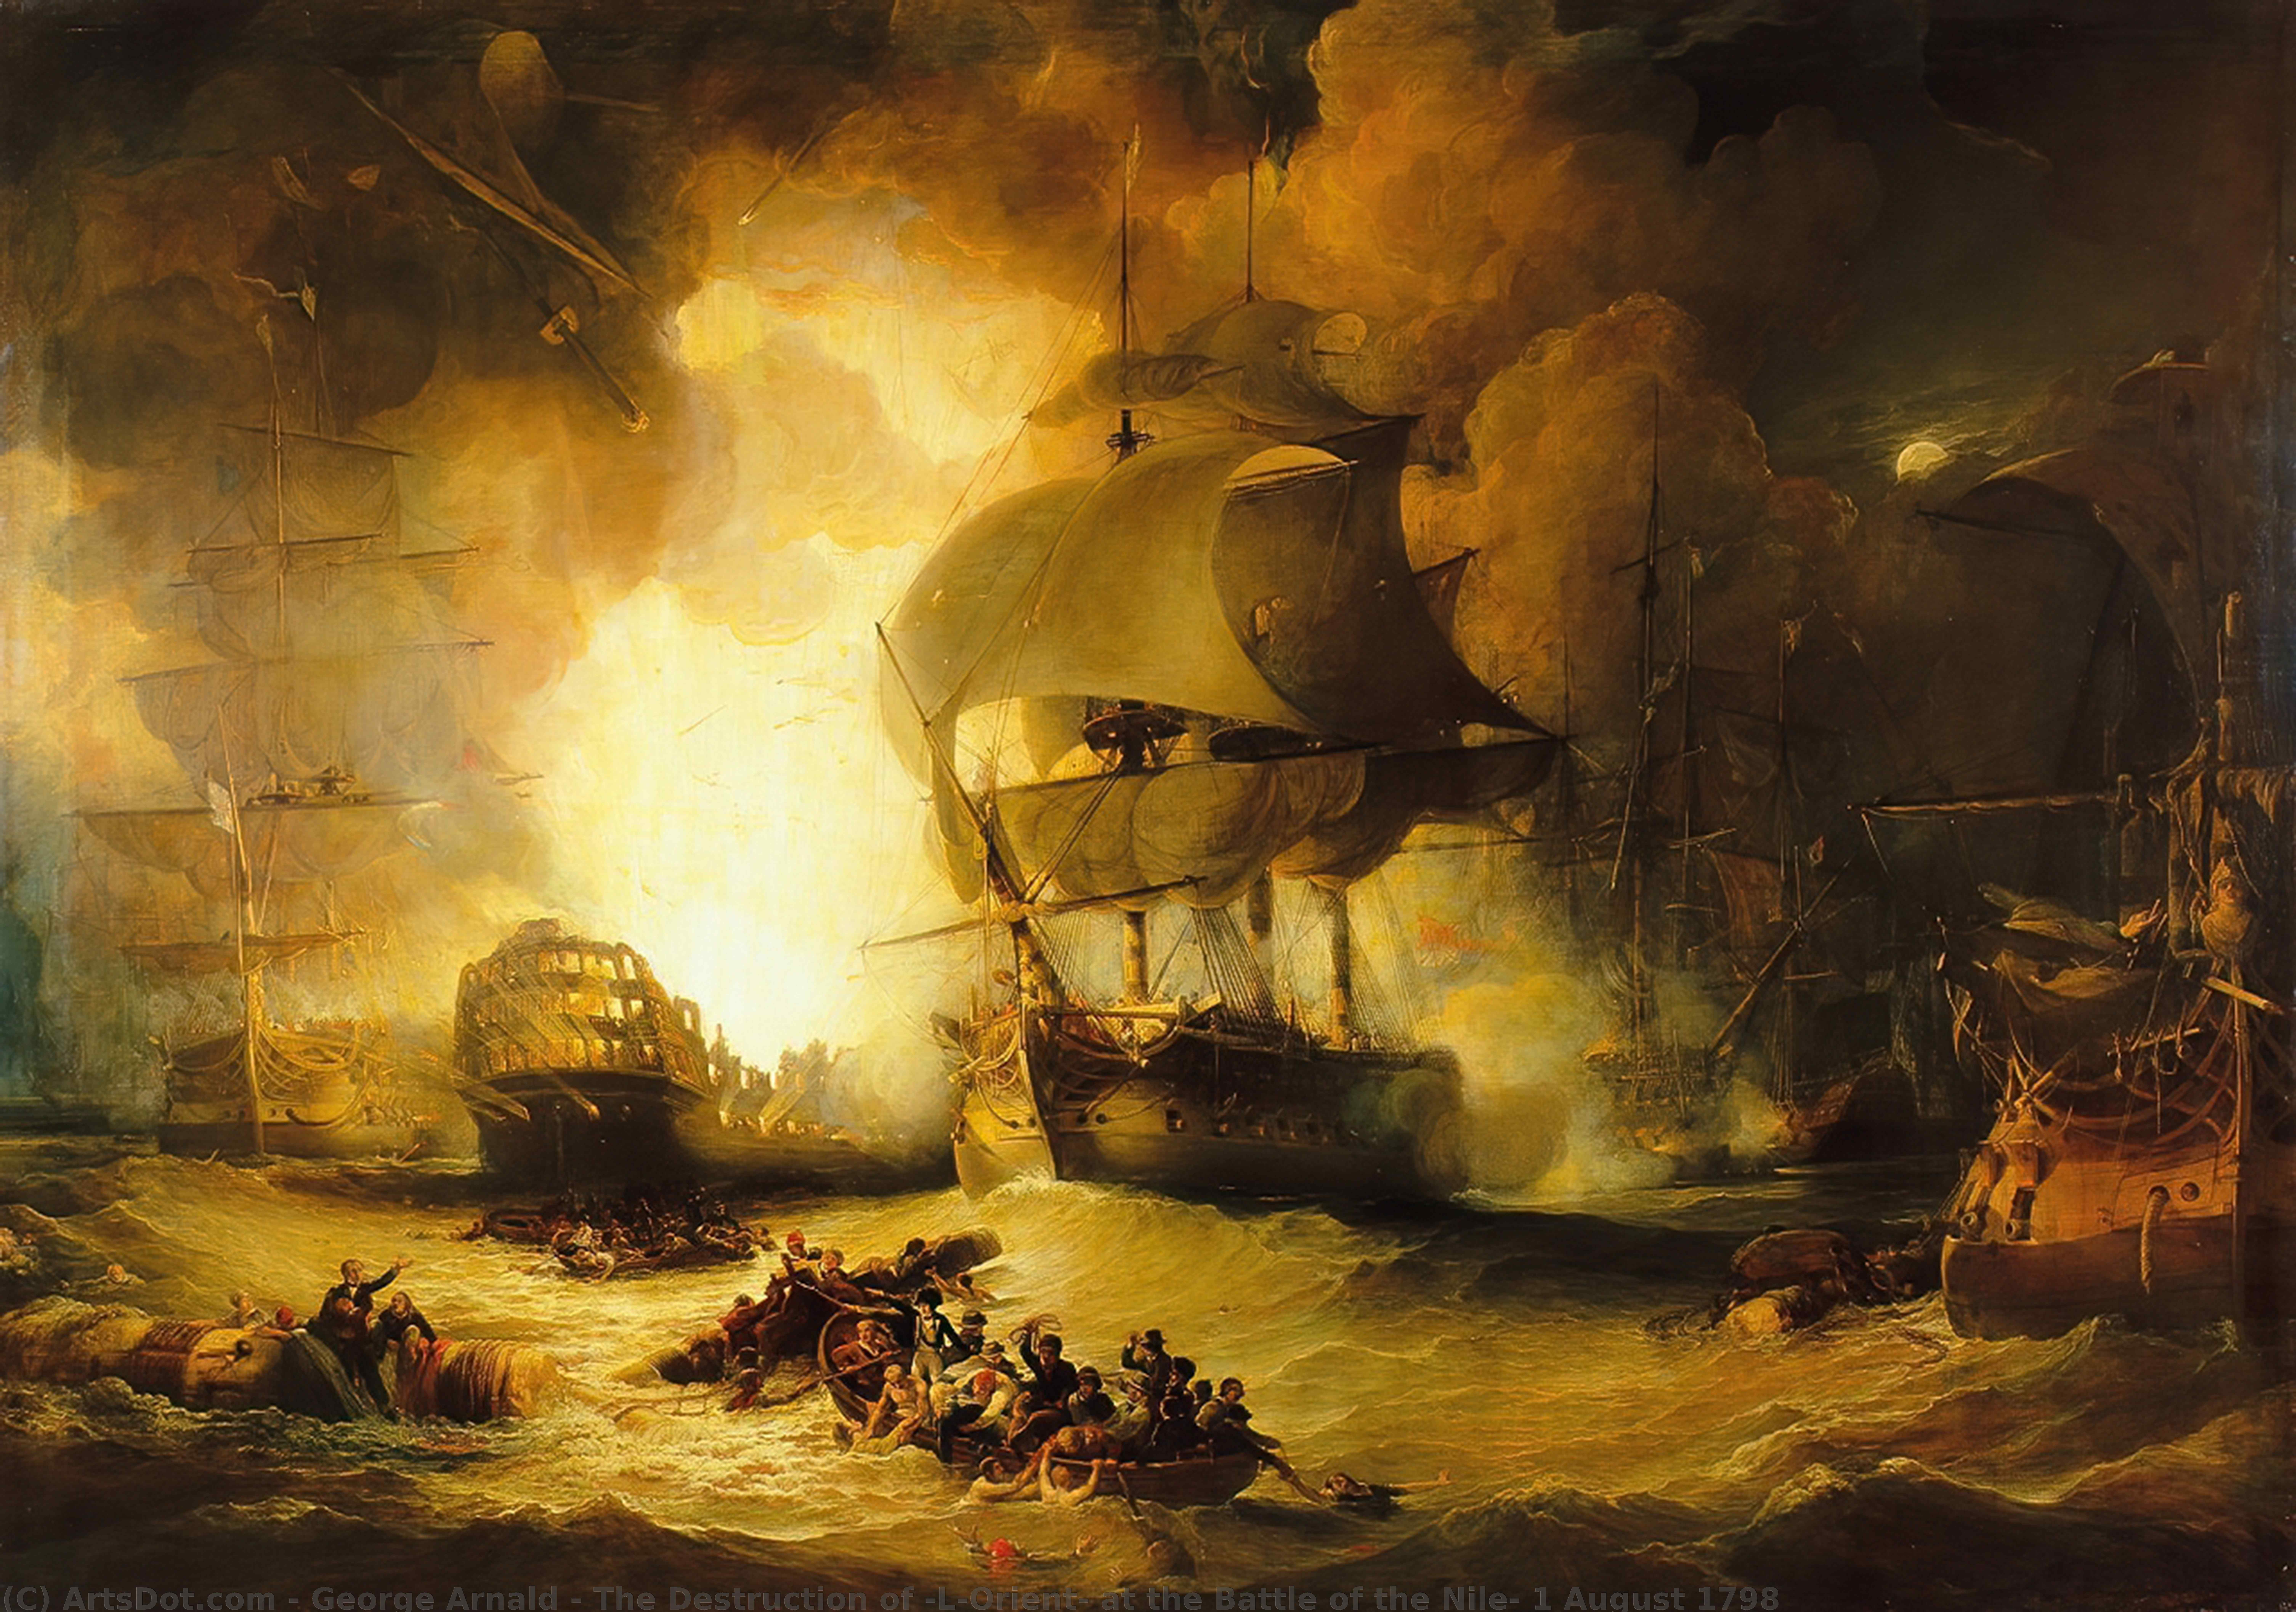 WikiOO.org - 백과 사전 - 회화, 삽화 George Arnald - The Destruction of 'L'Orient' at the Battle of the Nile, 1 August 1798